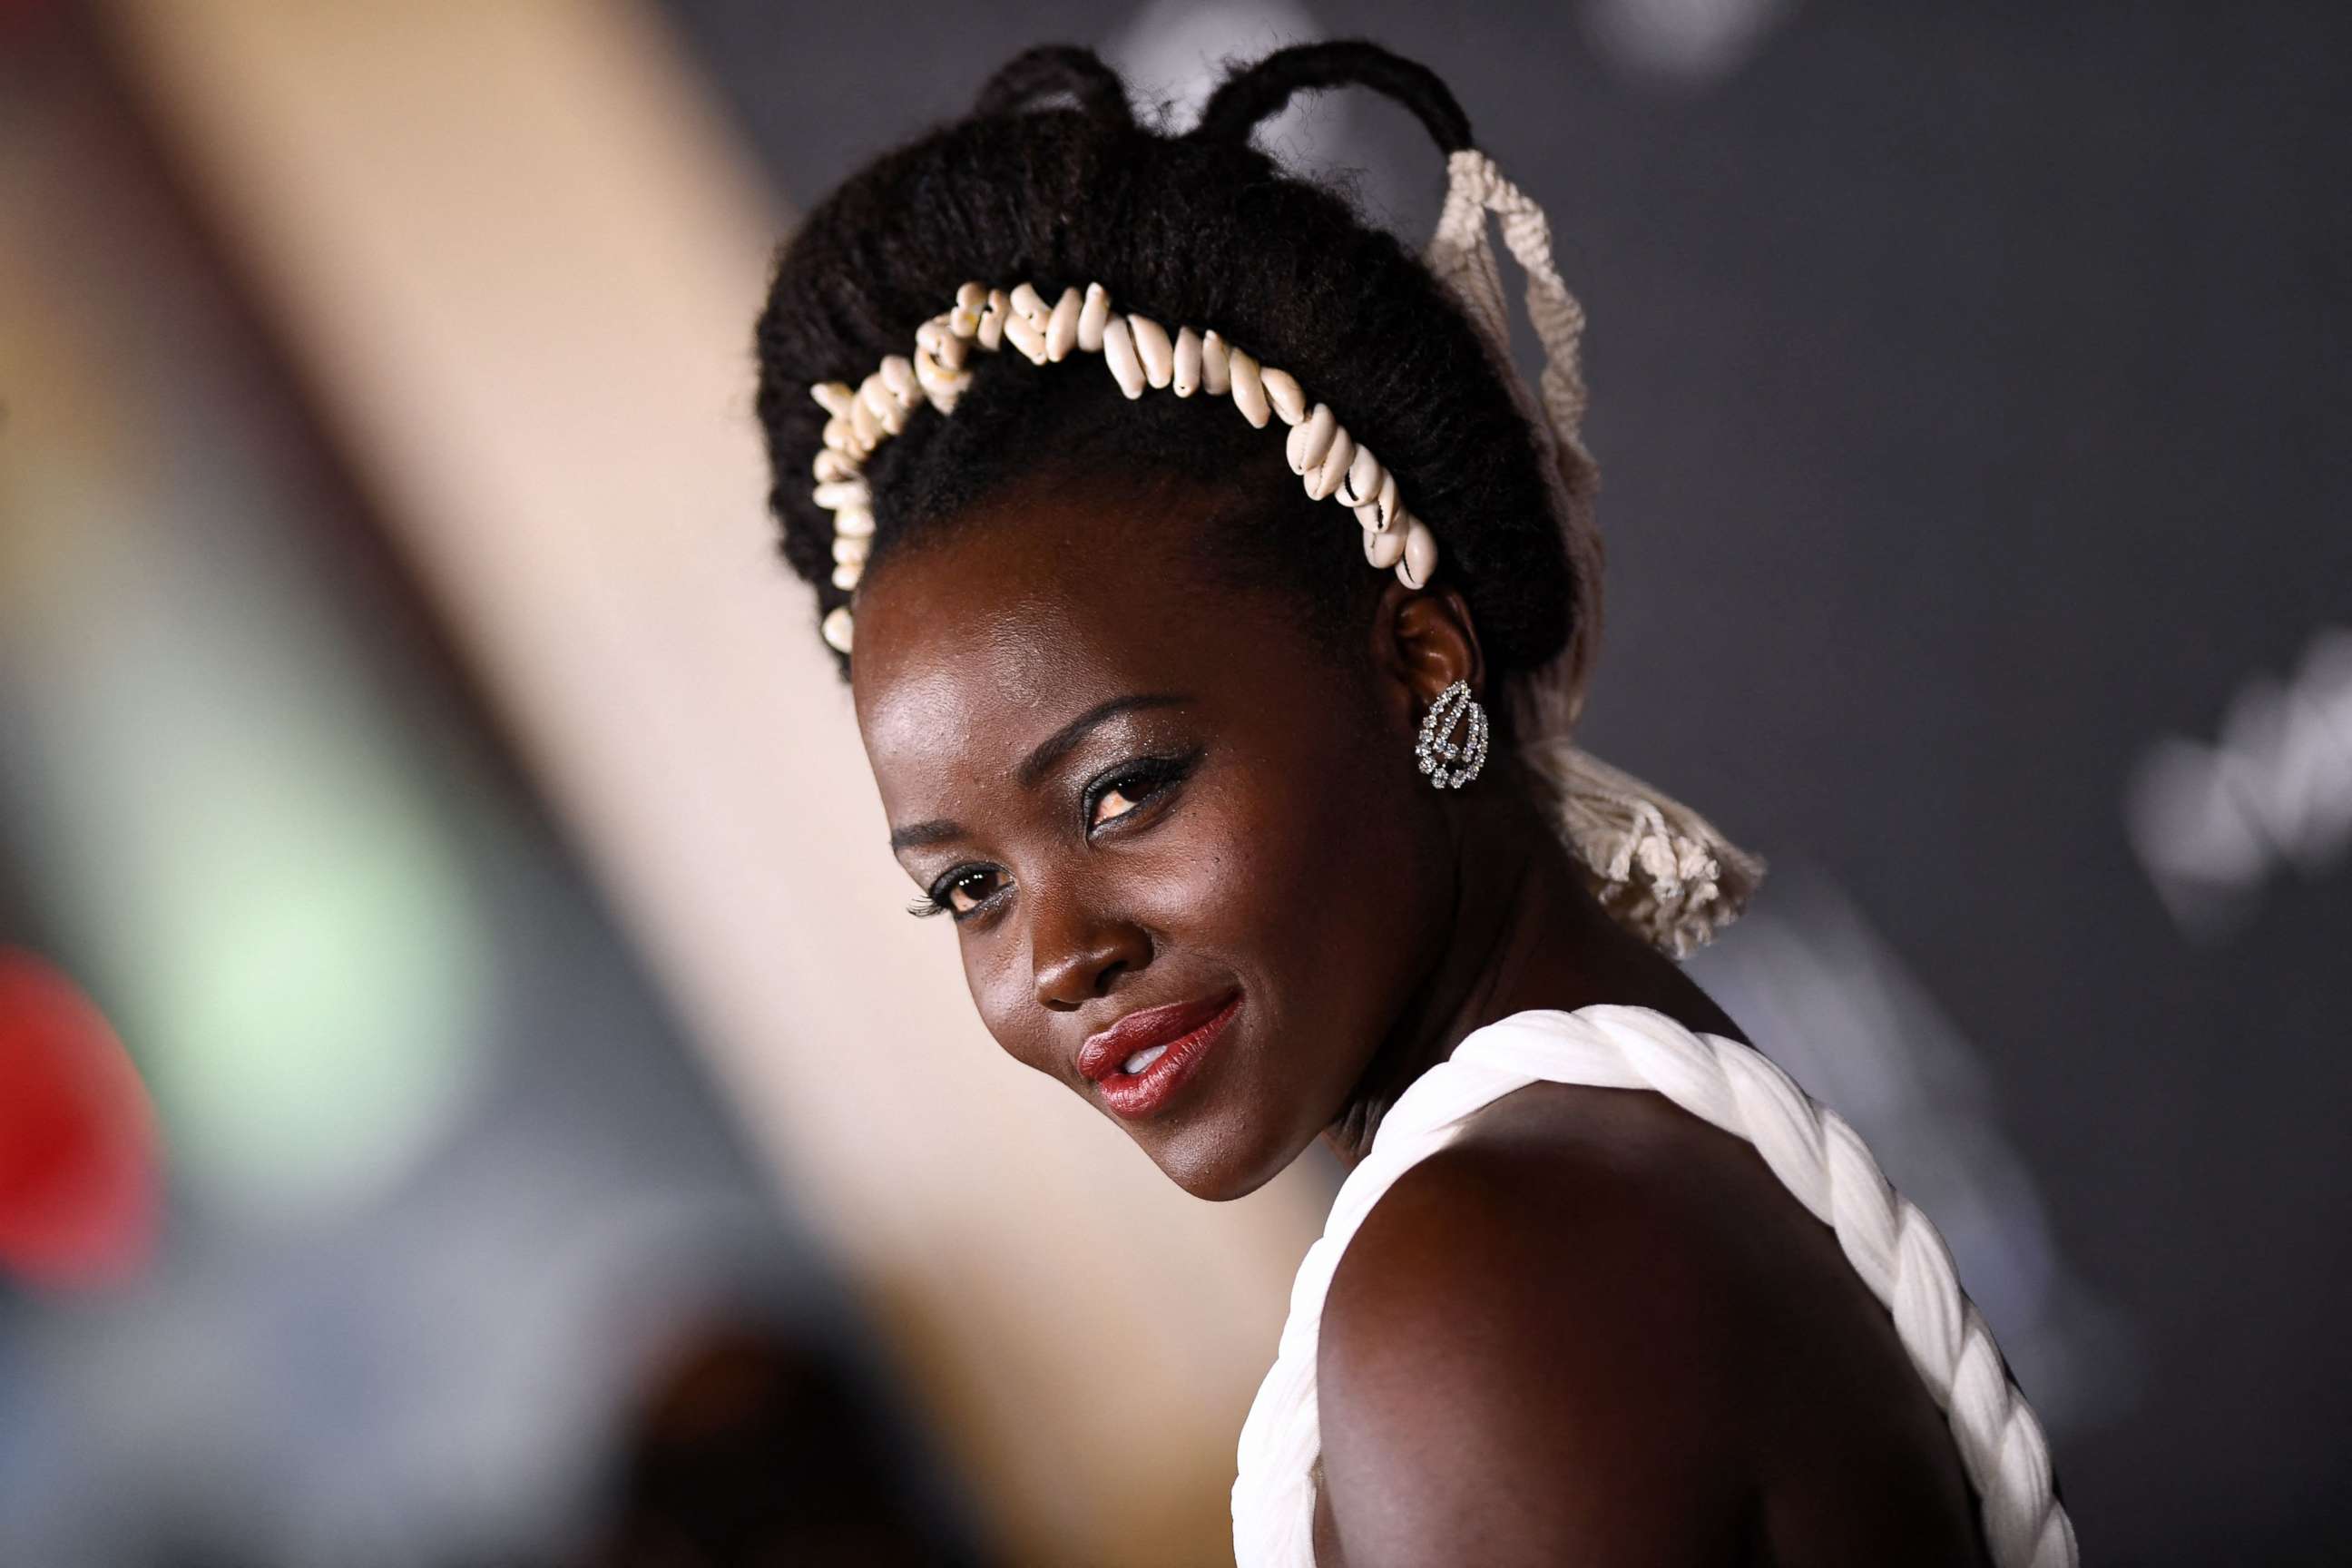 PHOTO: Kenyan-Mexican actress Lupita Nyong'o arrives for the world premiere of Marvel Studios' "Black Panther: Wakanda Forever" at the Dolby Theatre in Hollywood, California, on October 26, 2022.